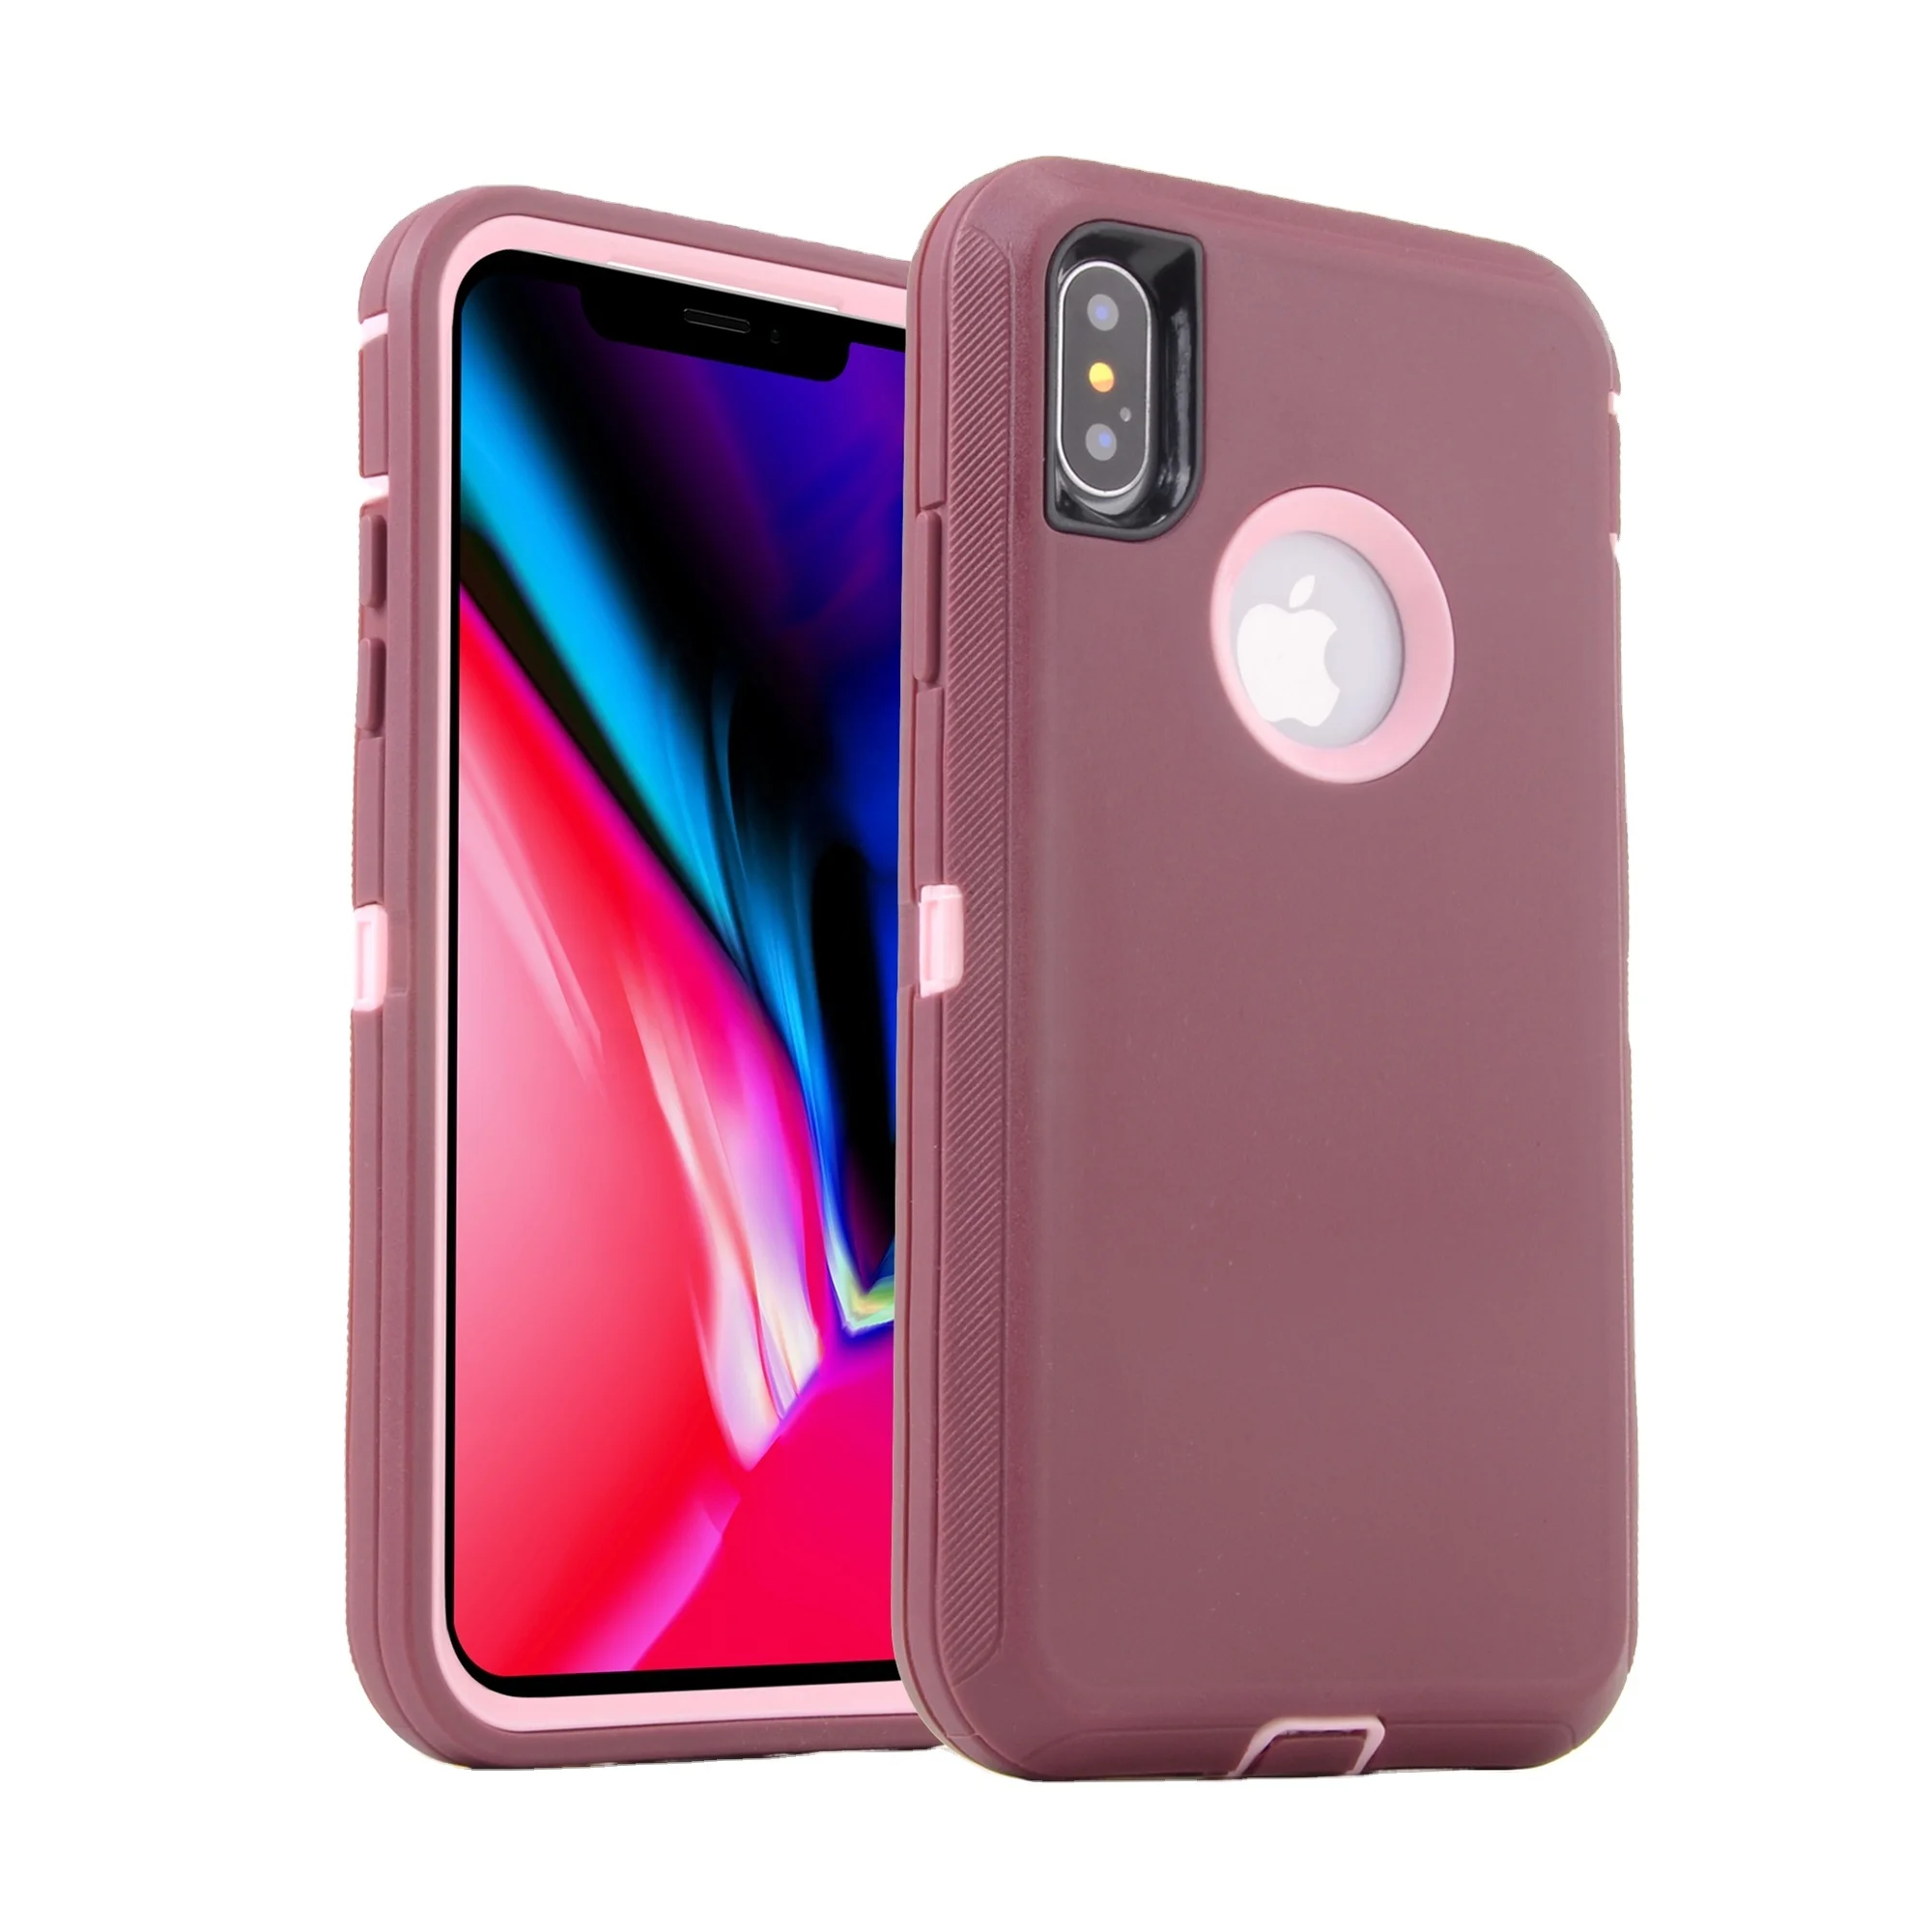 

For iPhone full protection 3 in 1 case Anti-slip Design Shockproof Defender Heavy Duty Phone Case for iPhone 6/7/8/xs/xr/xs max, Mix colors